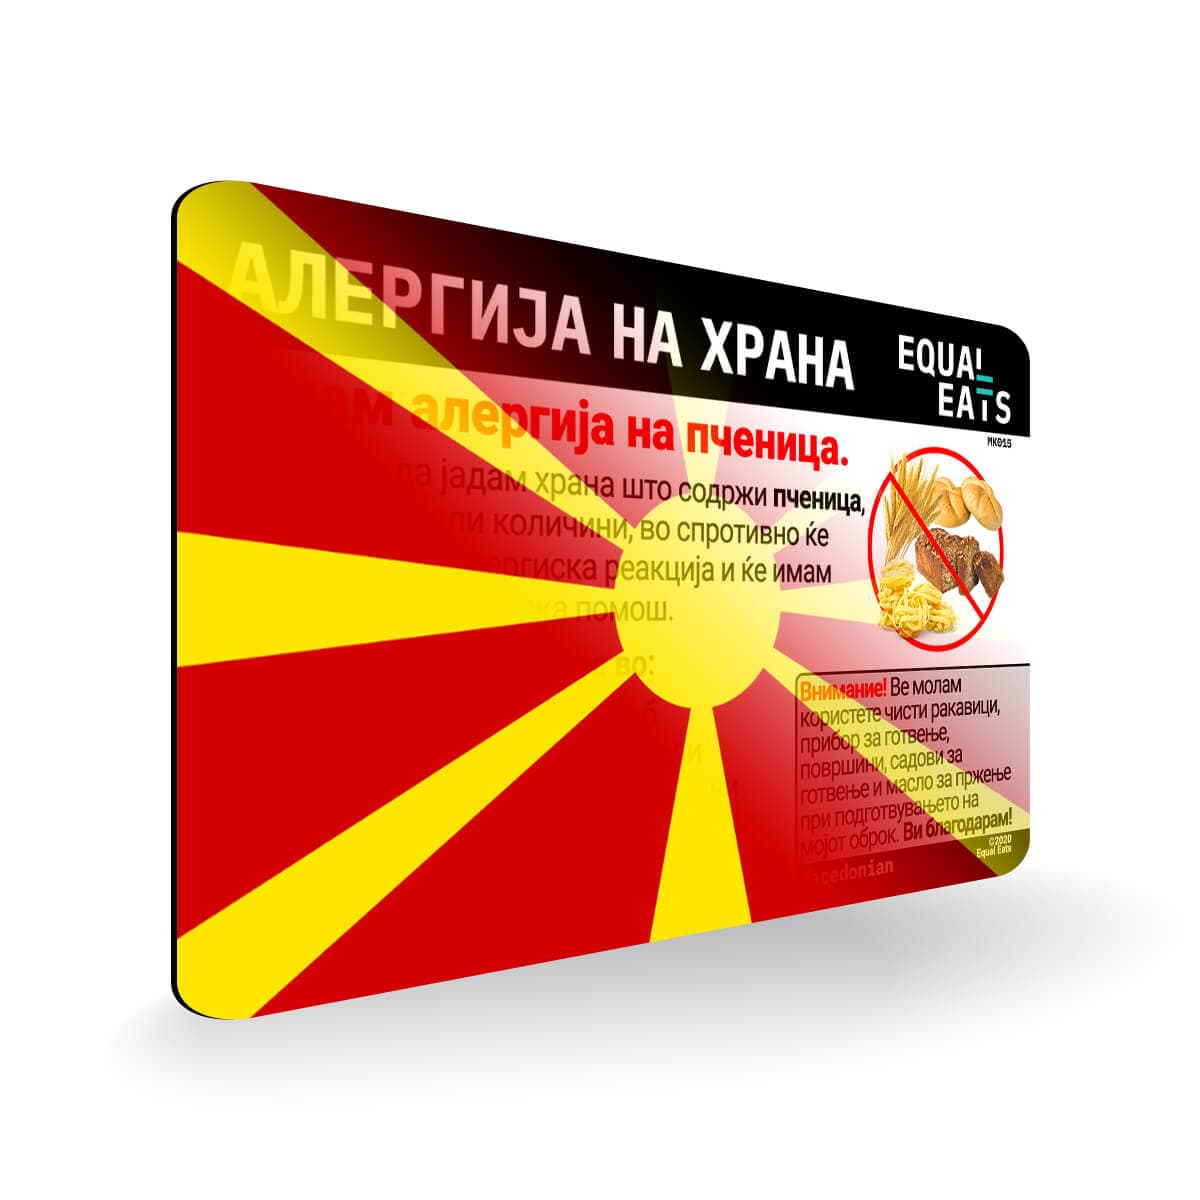 Wheat Allergy in Macedonian. Wheat Allergy Card for Macedonia